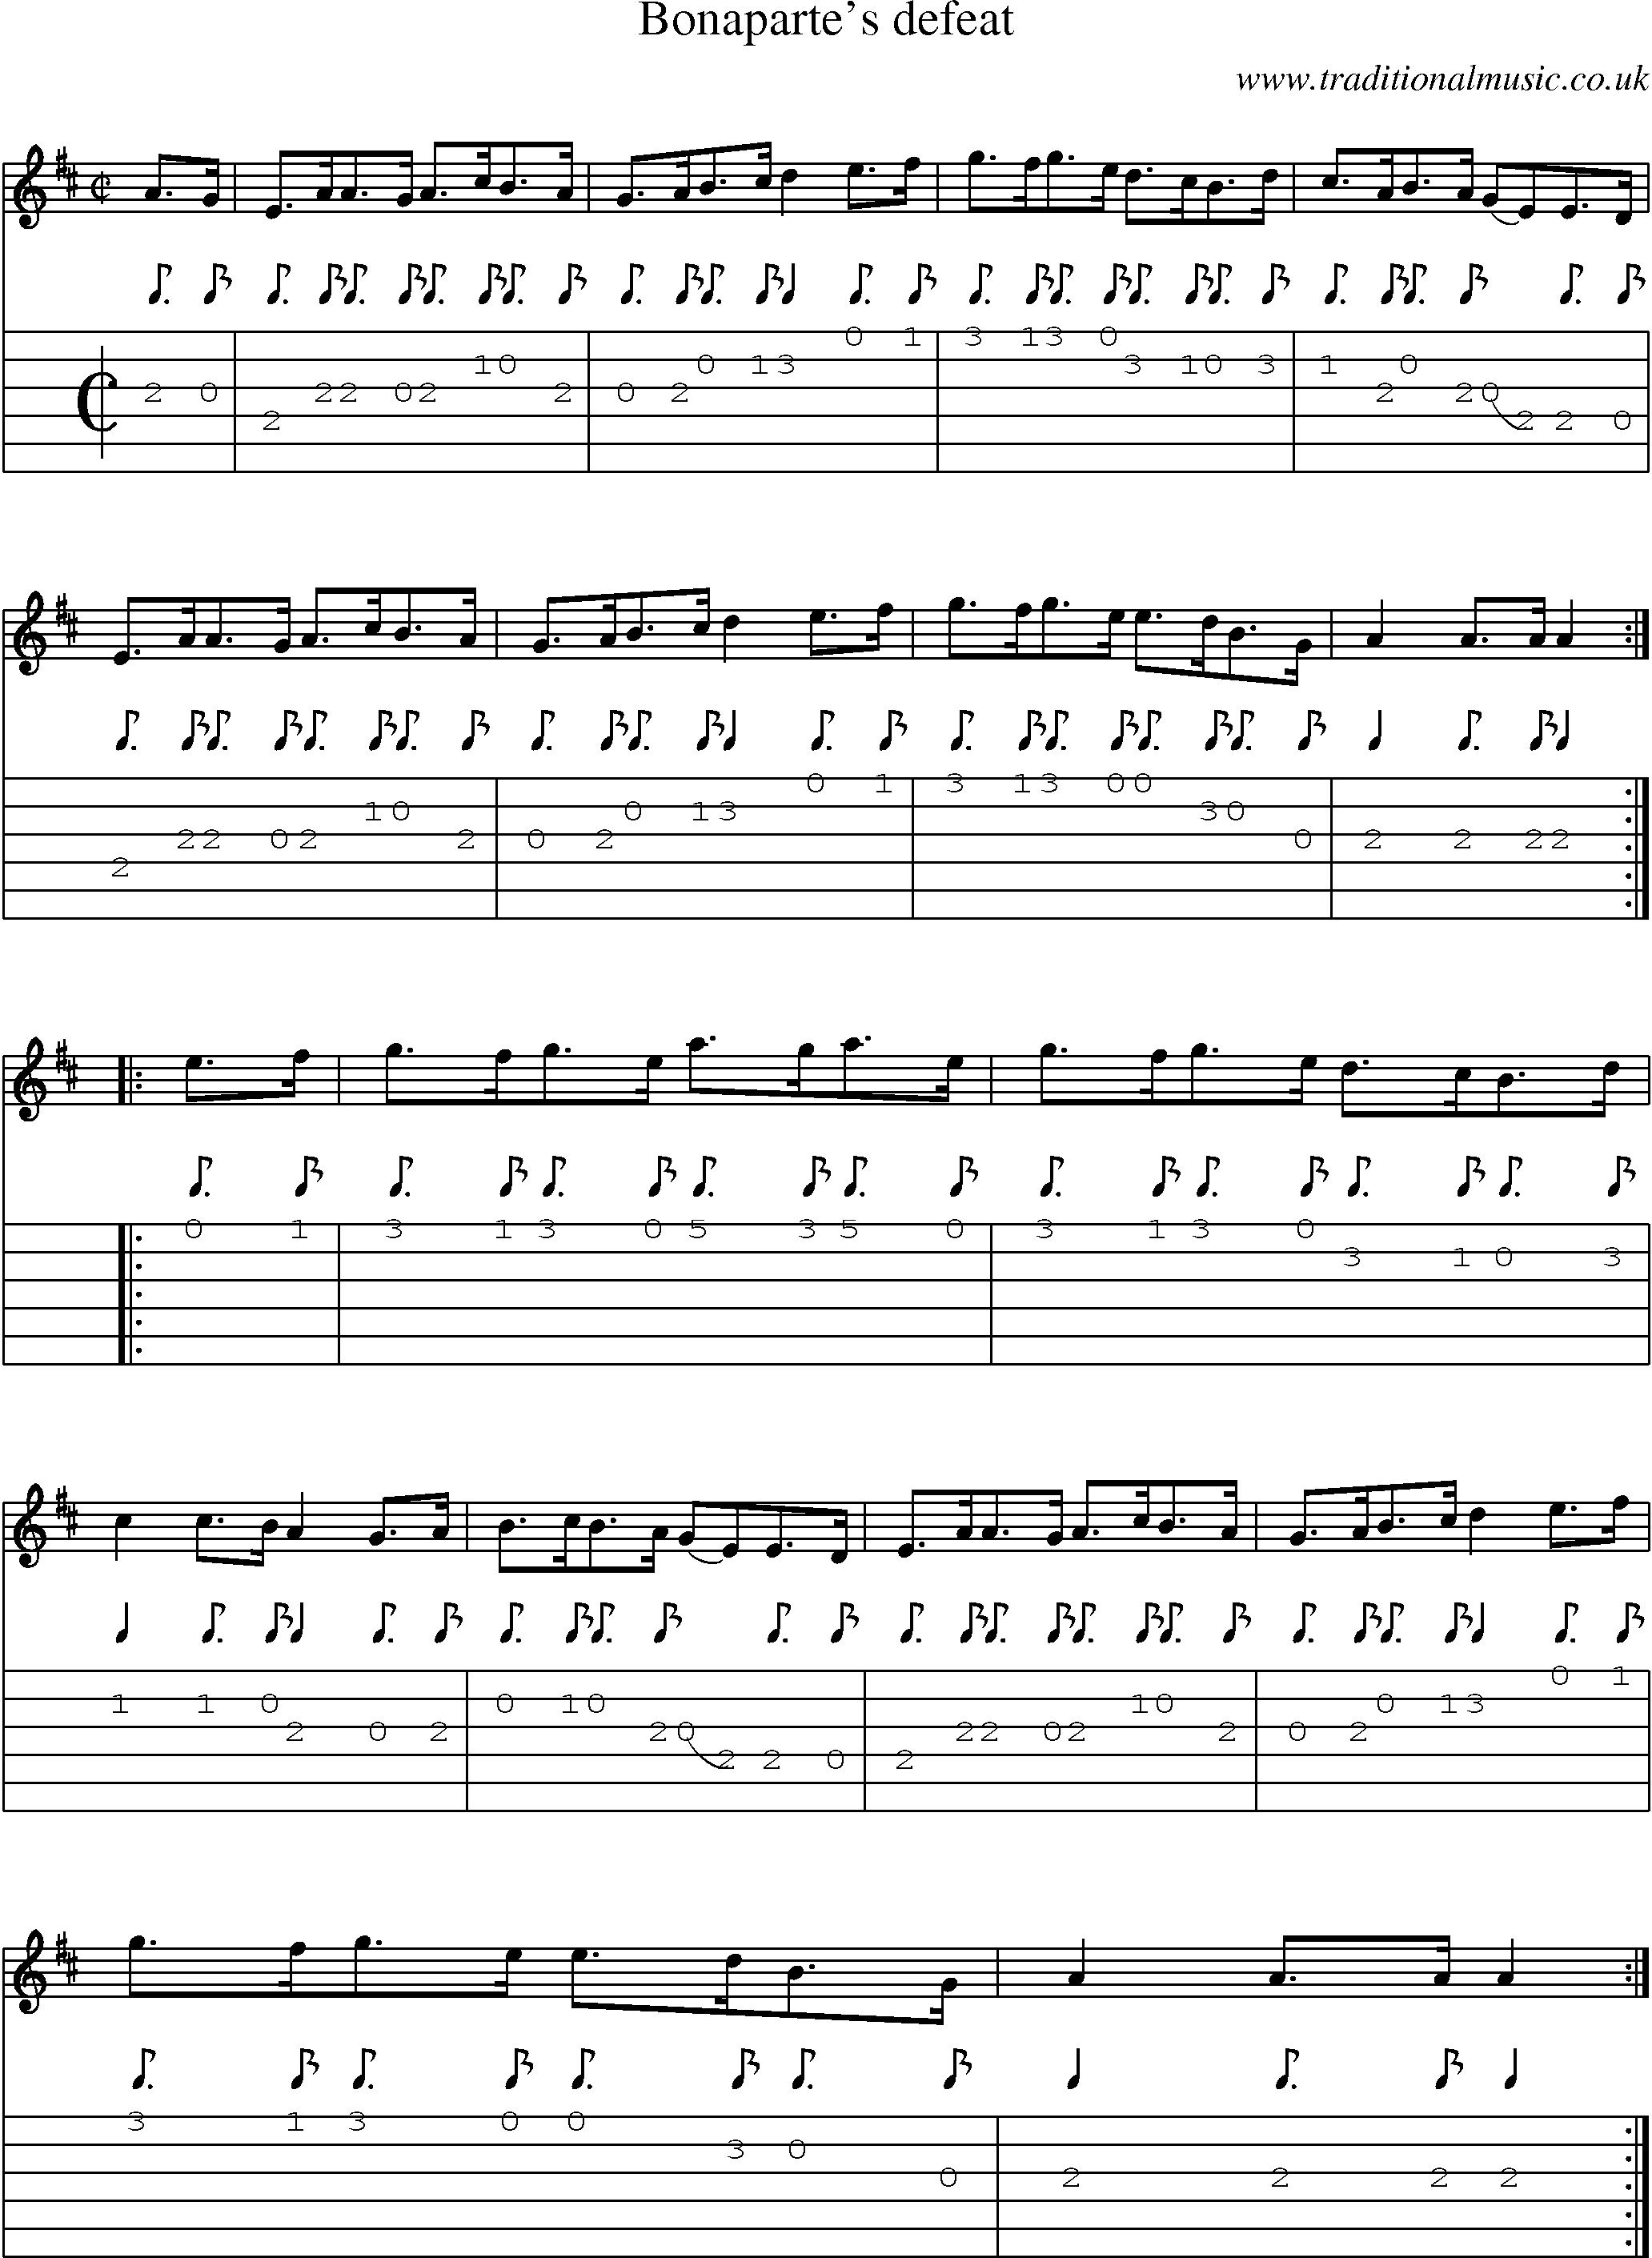 Music Score and Guitar Tabs for Bonapartes Defeat